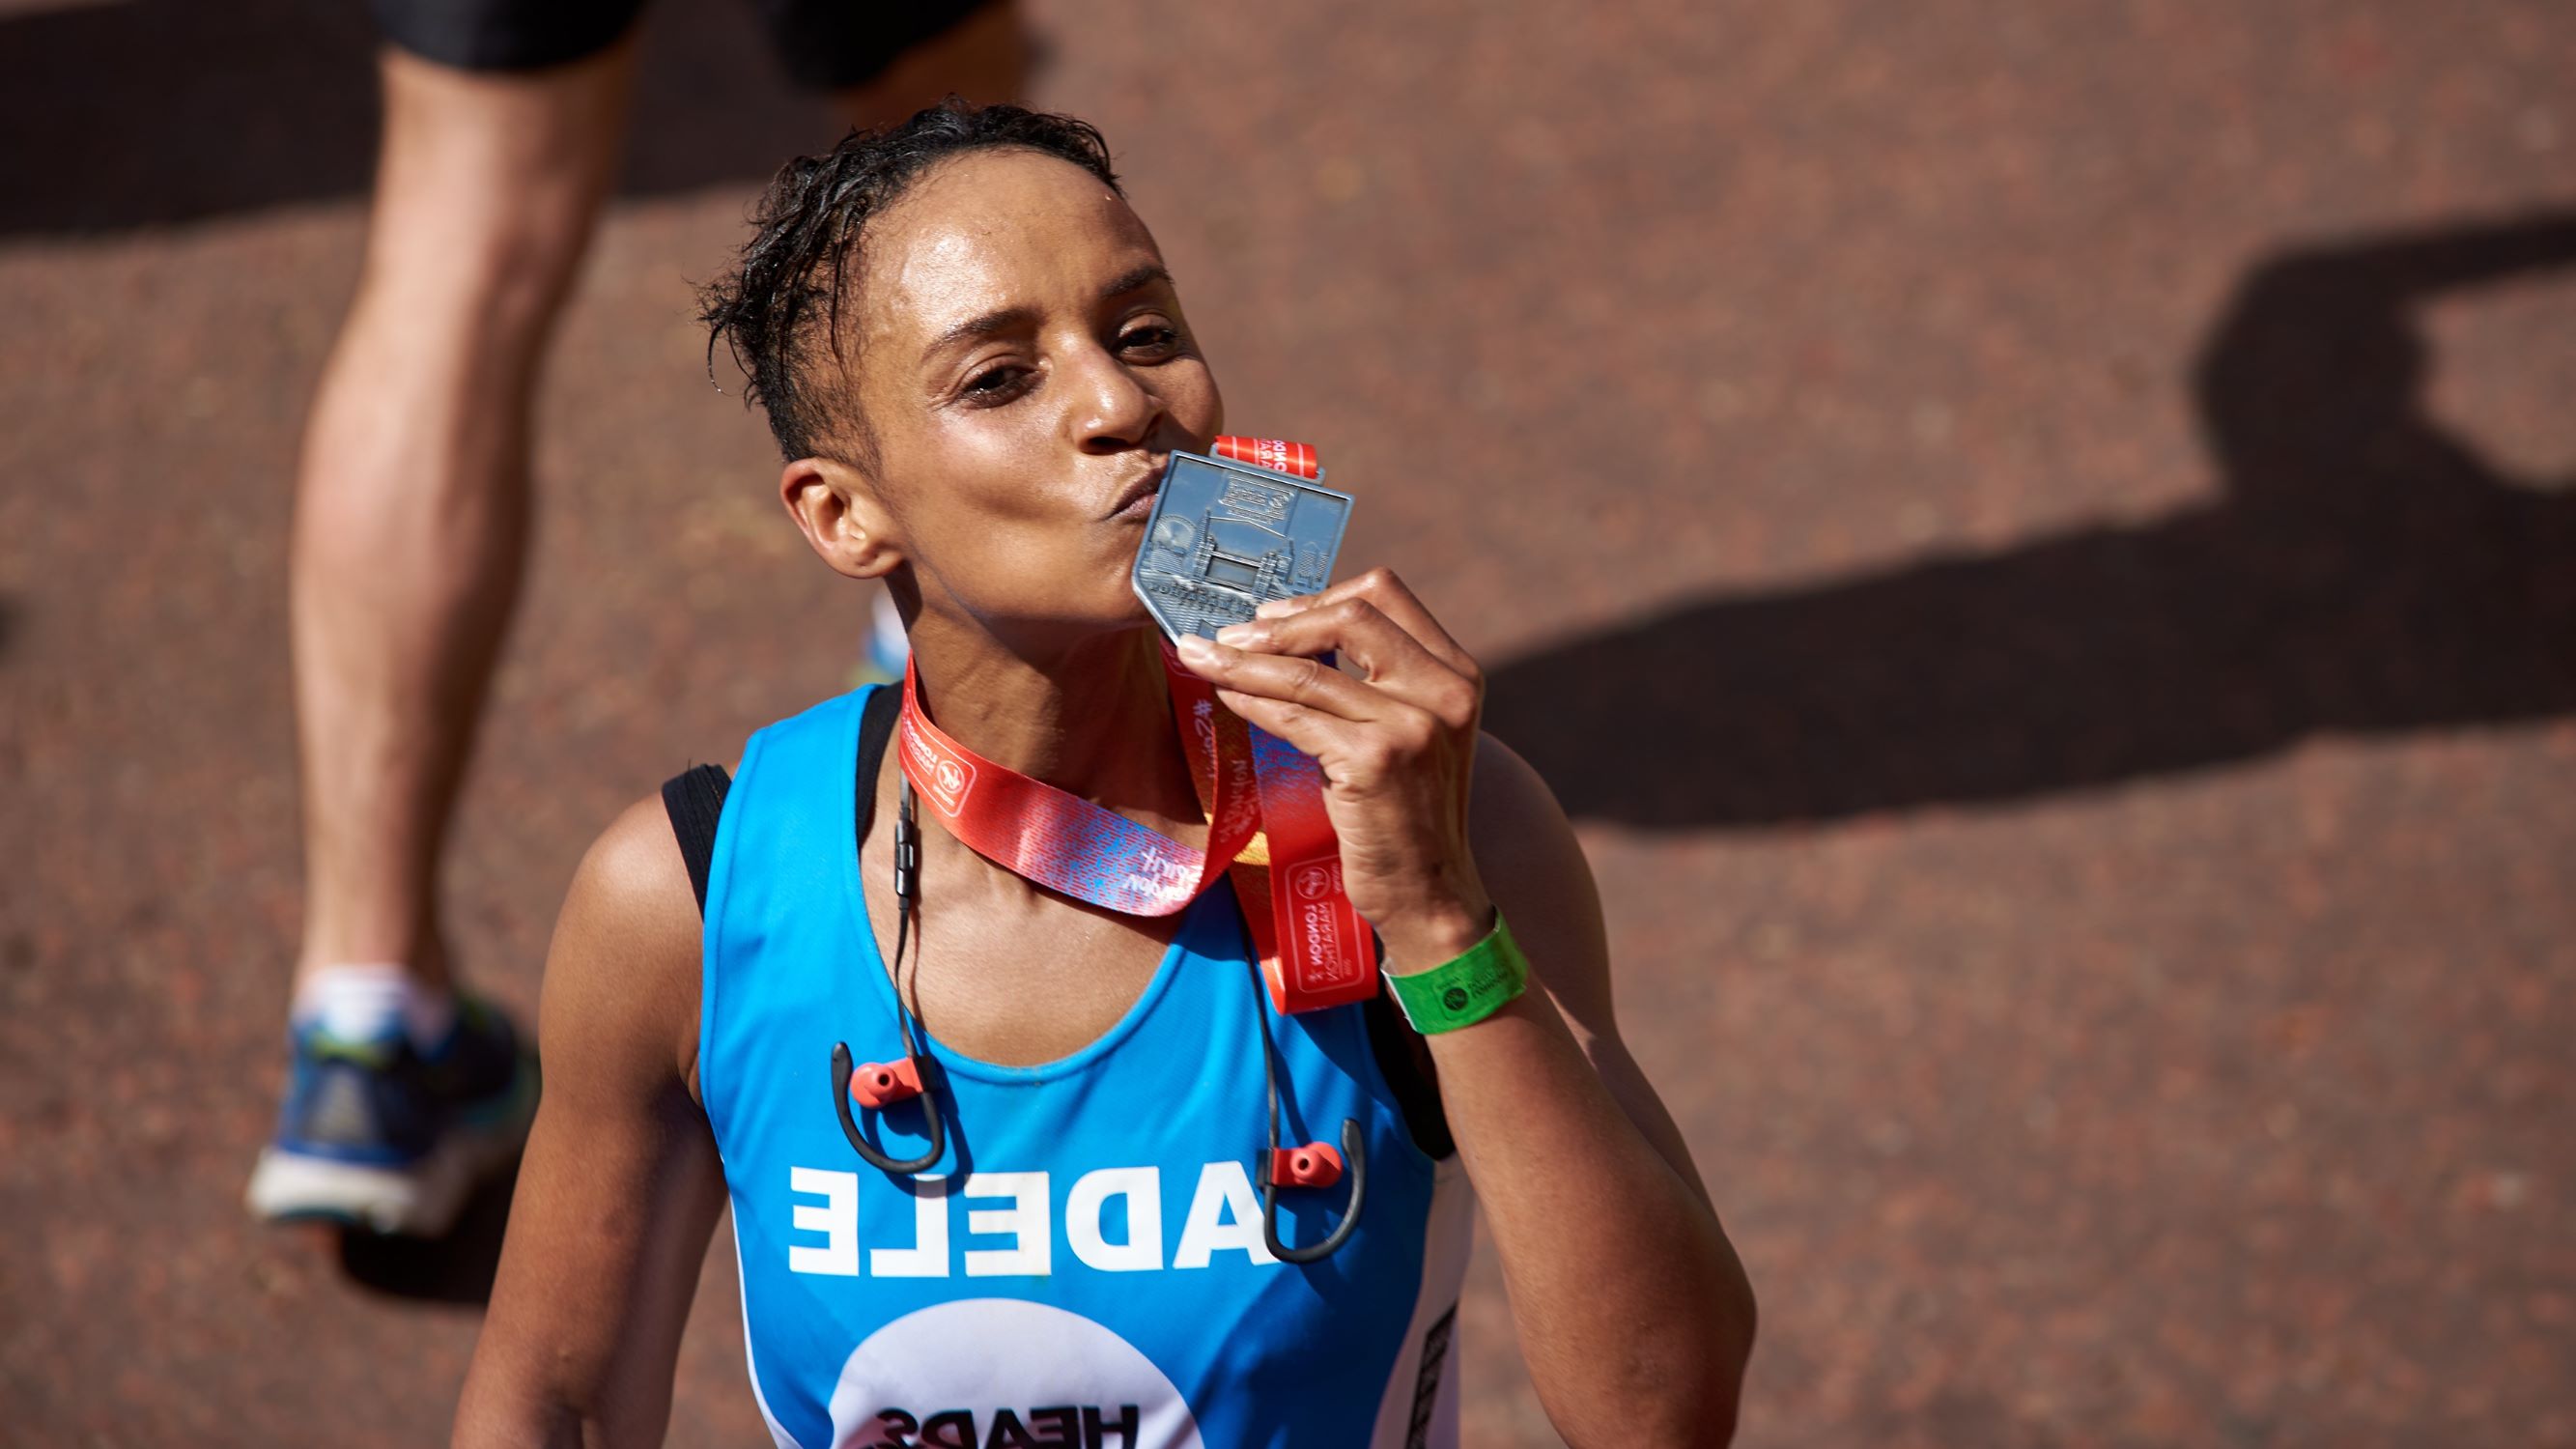 12 Famous Faces Who Participated In The London Marathon And Their Impressive Finish Times